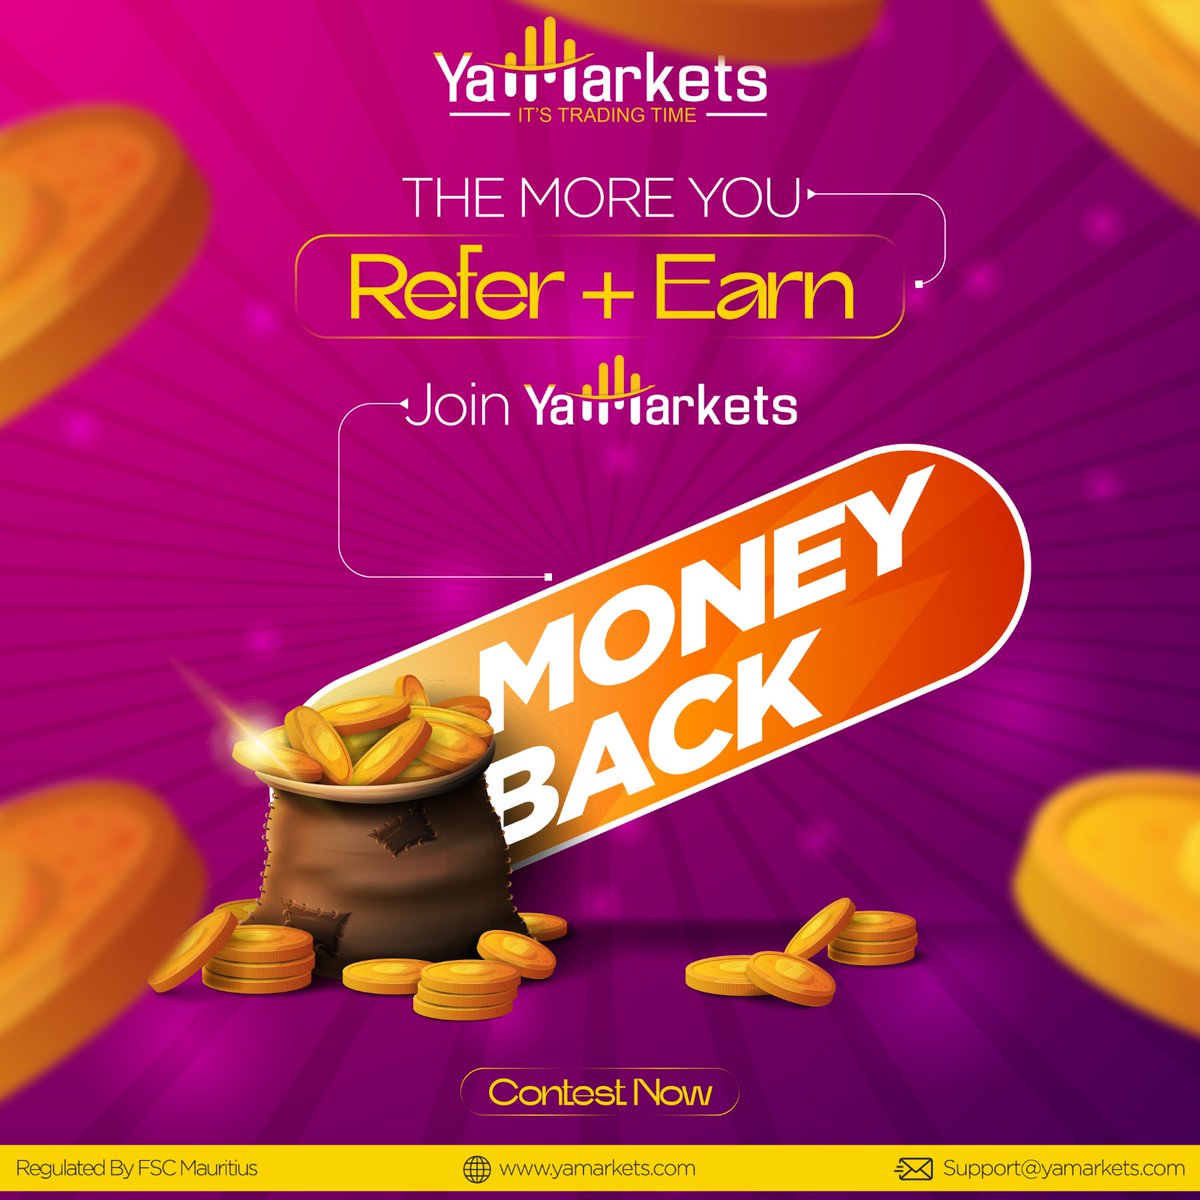 Join the YaMarkets Community: By participating in the Money Back IB Contest, you'll become part of a vibrant community of passionate traders and professionals. 
#YAMarkets #MoneyBackIB #Contest #PartnershipOpportunity #WinBig #Yamarkets #TradeSmart #JoinToday #tradablebonus